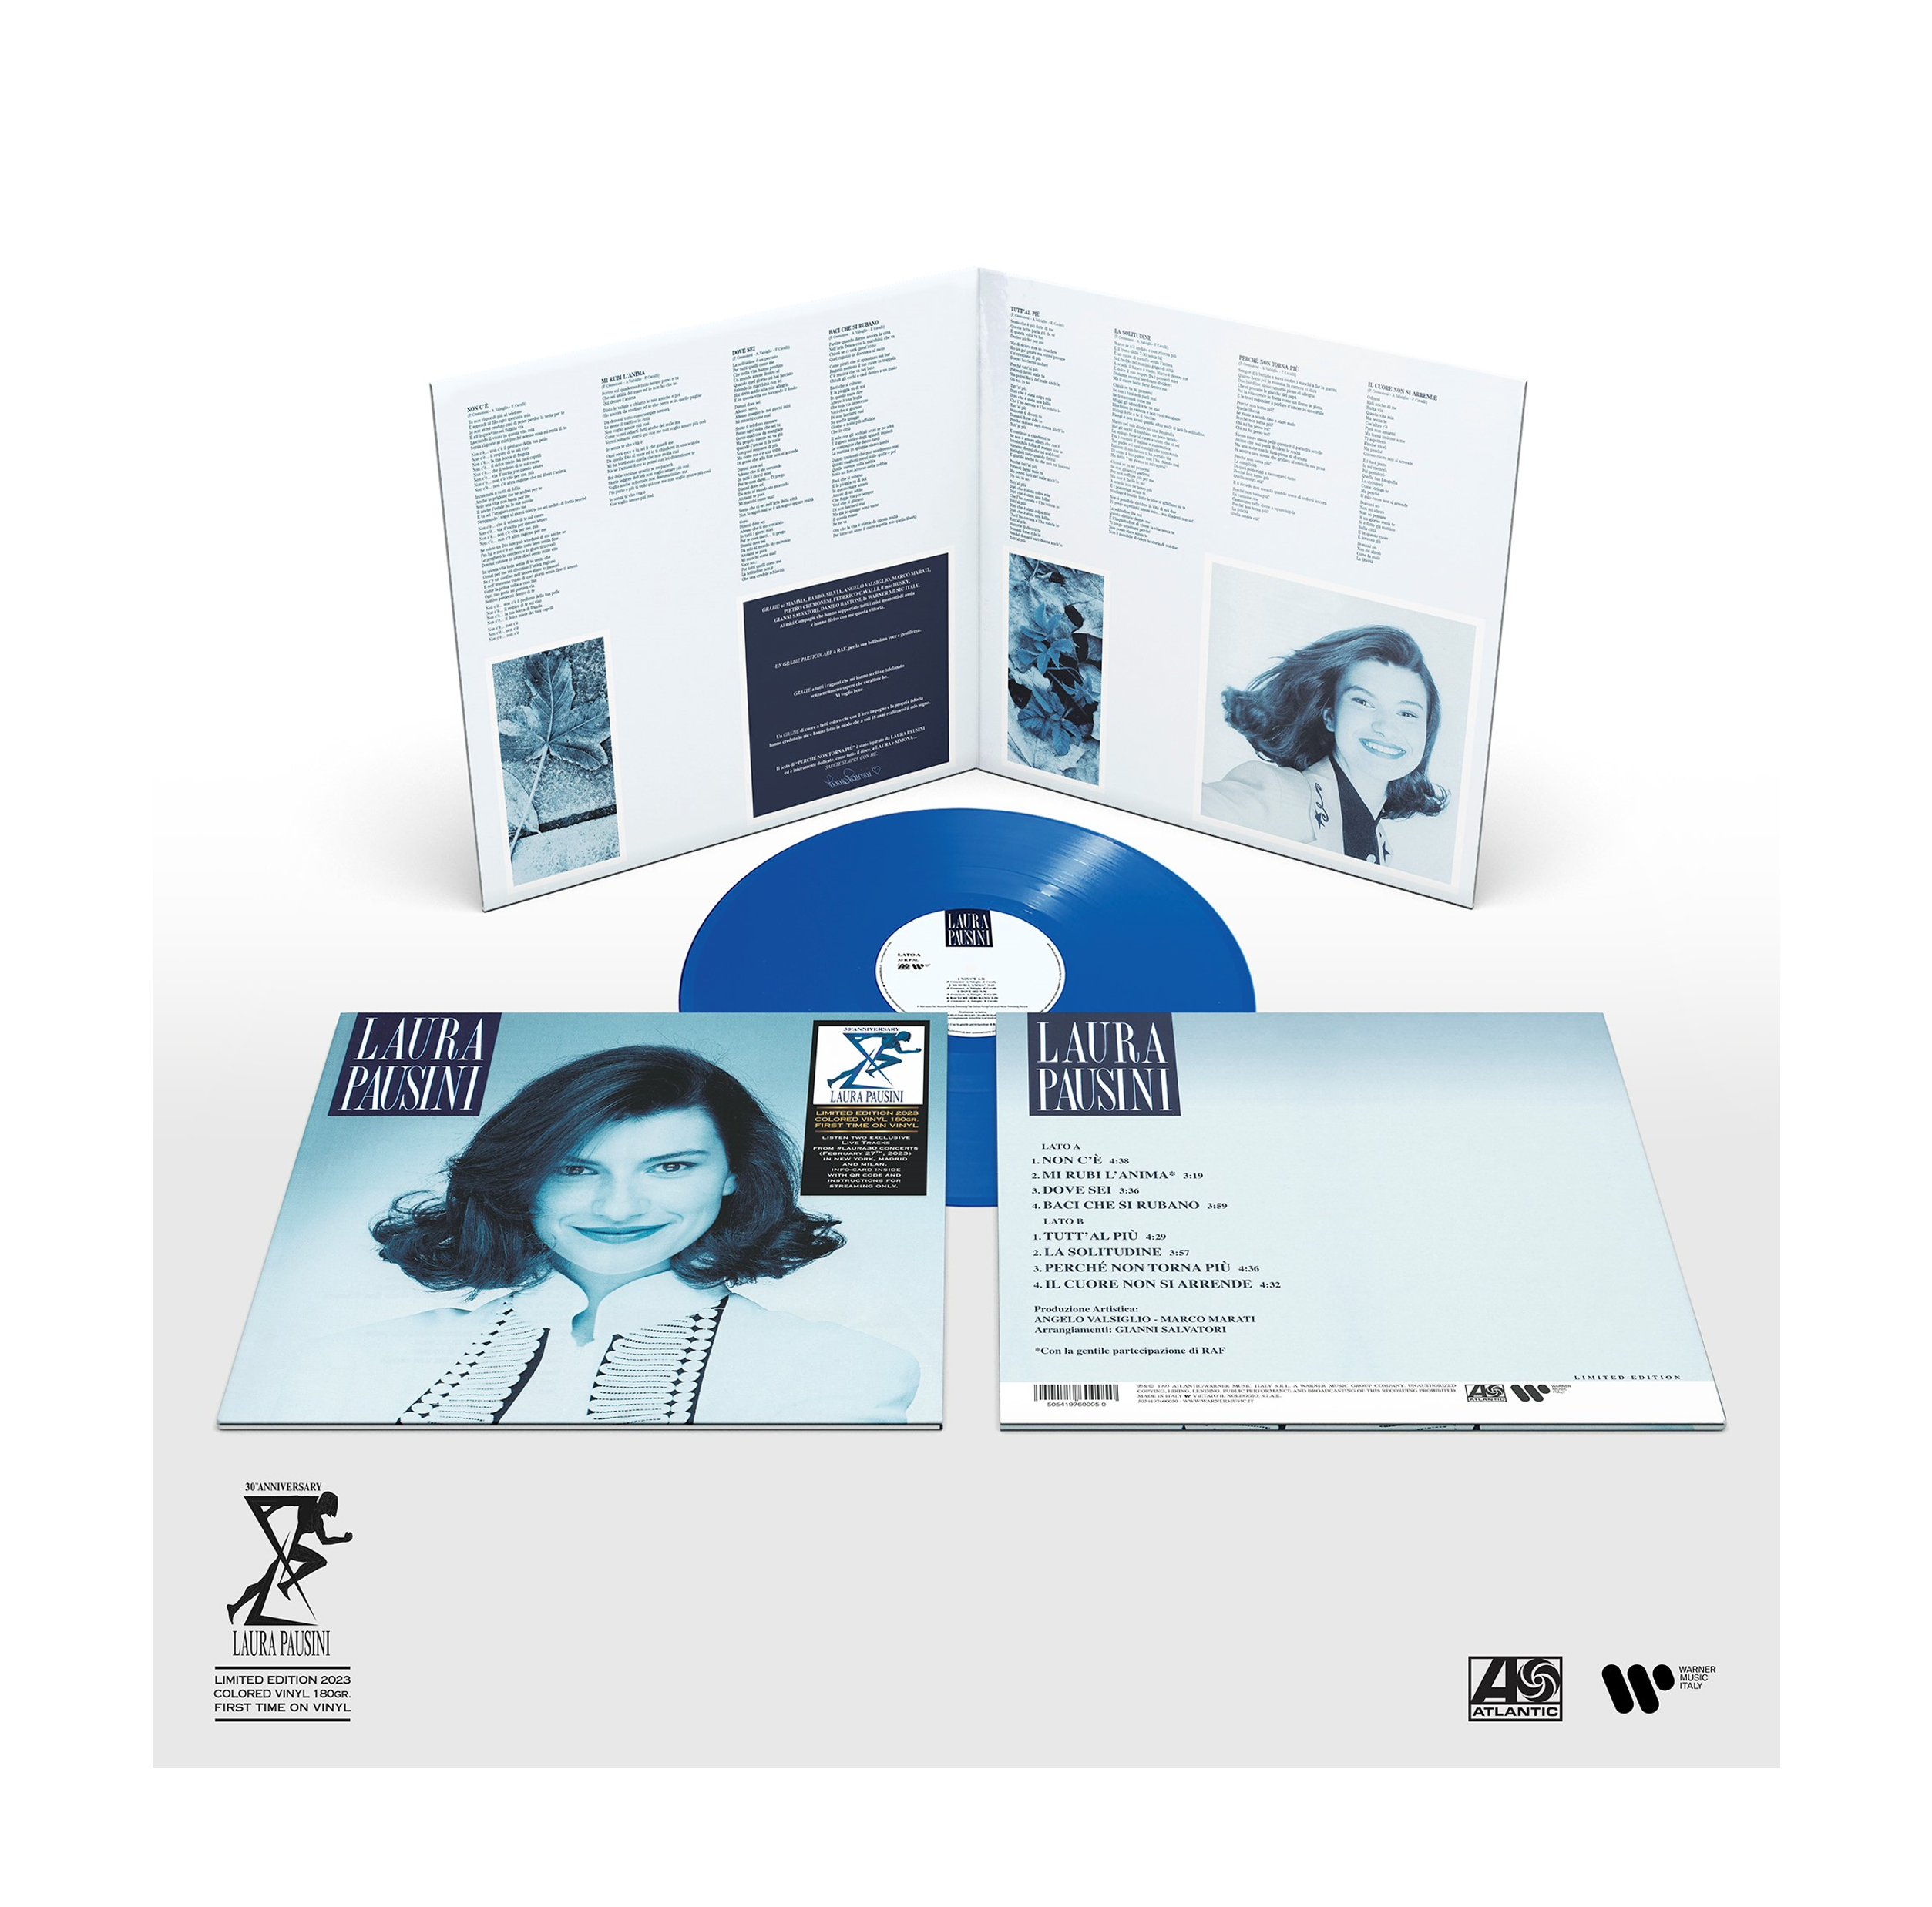 LAURA PAUSINI (1LP 180g Blue Vinyl. Limited & Numbered Edition) – Warner  Music Italy Shop